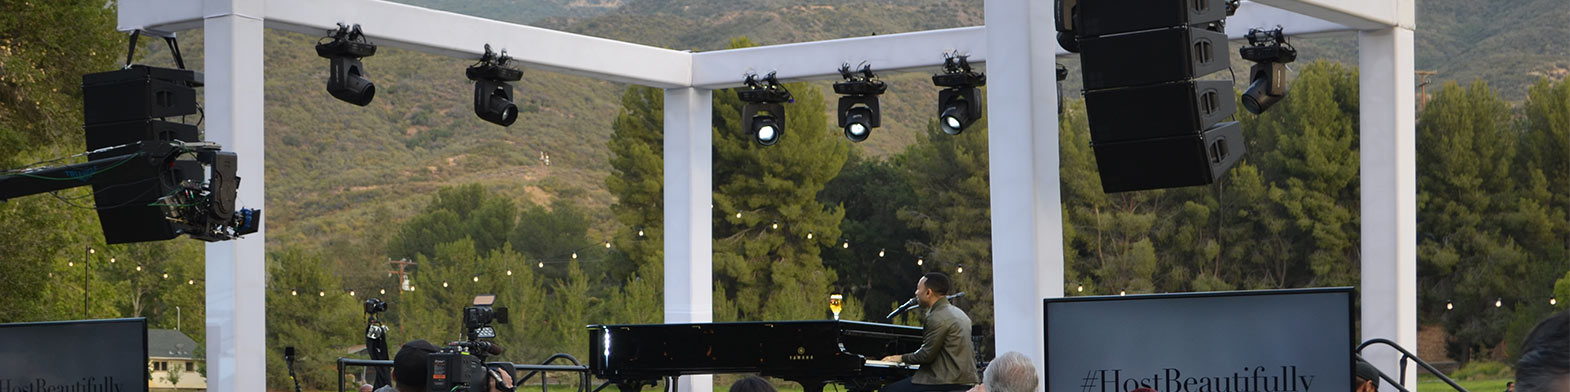 Man Playing Piano On Stage Surrounded By Light Blocking Truss Covers